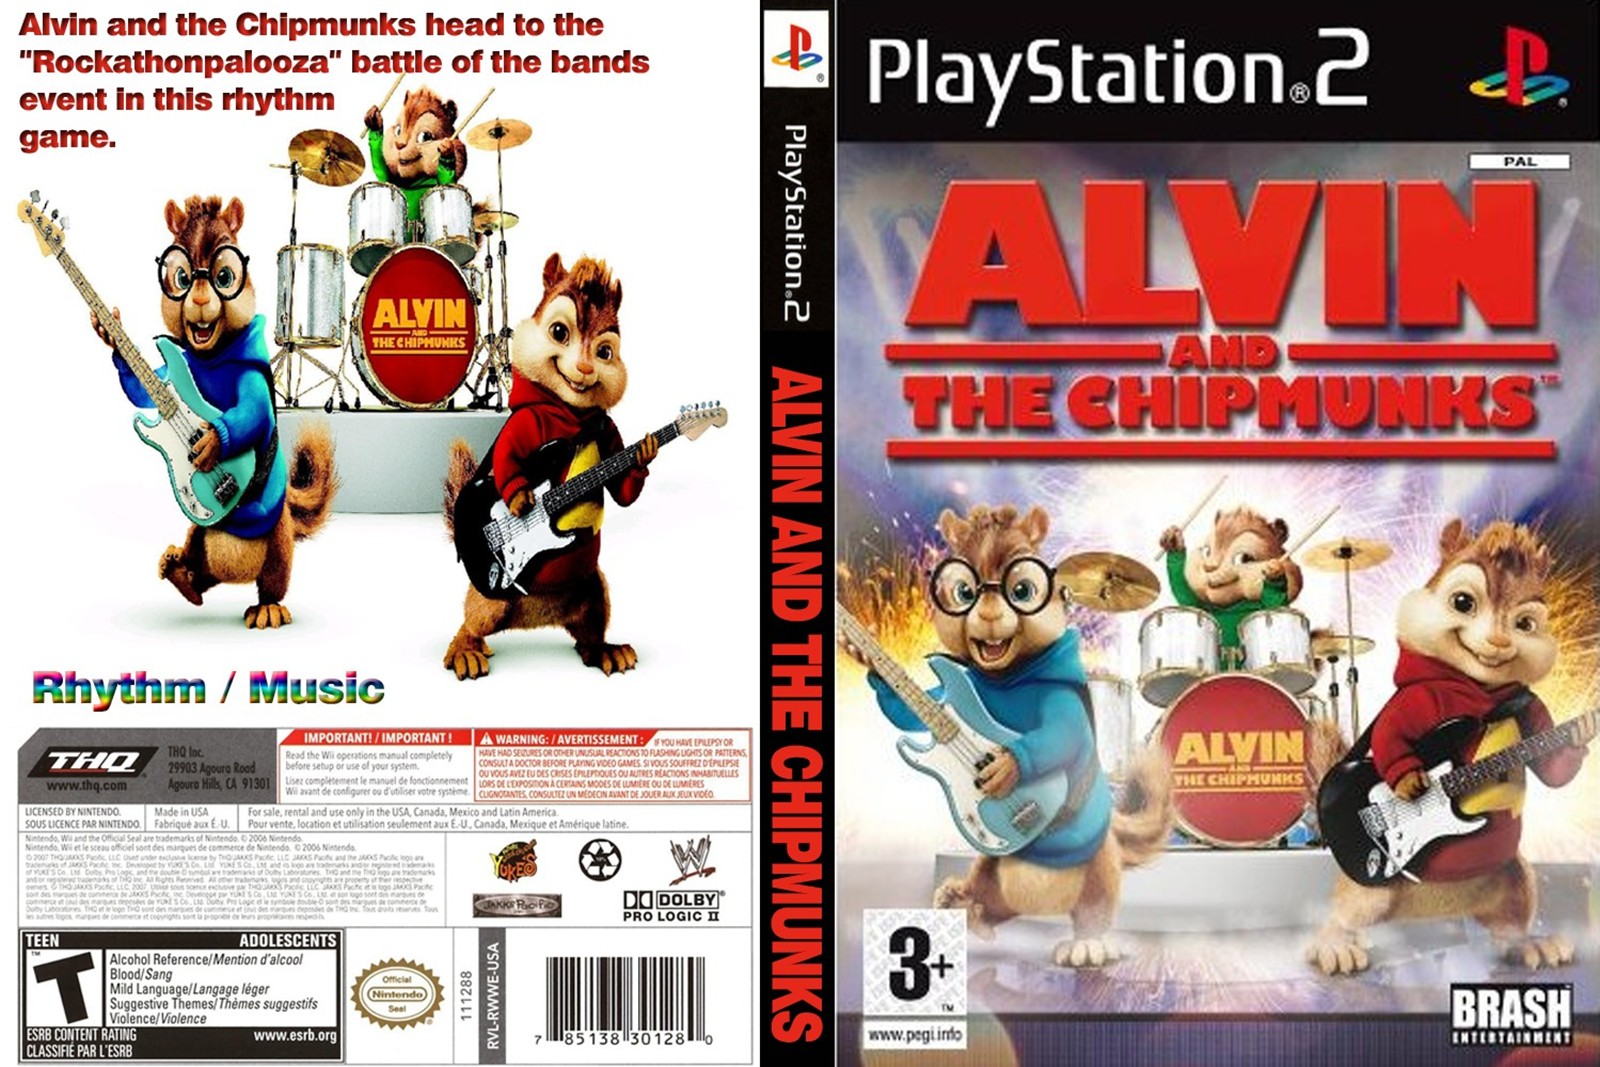 Alvin and the Chipmunks (PS2) Gameplay.